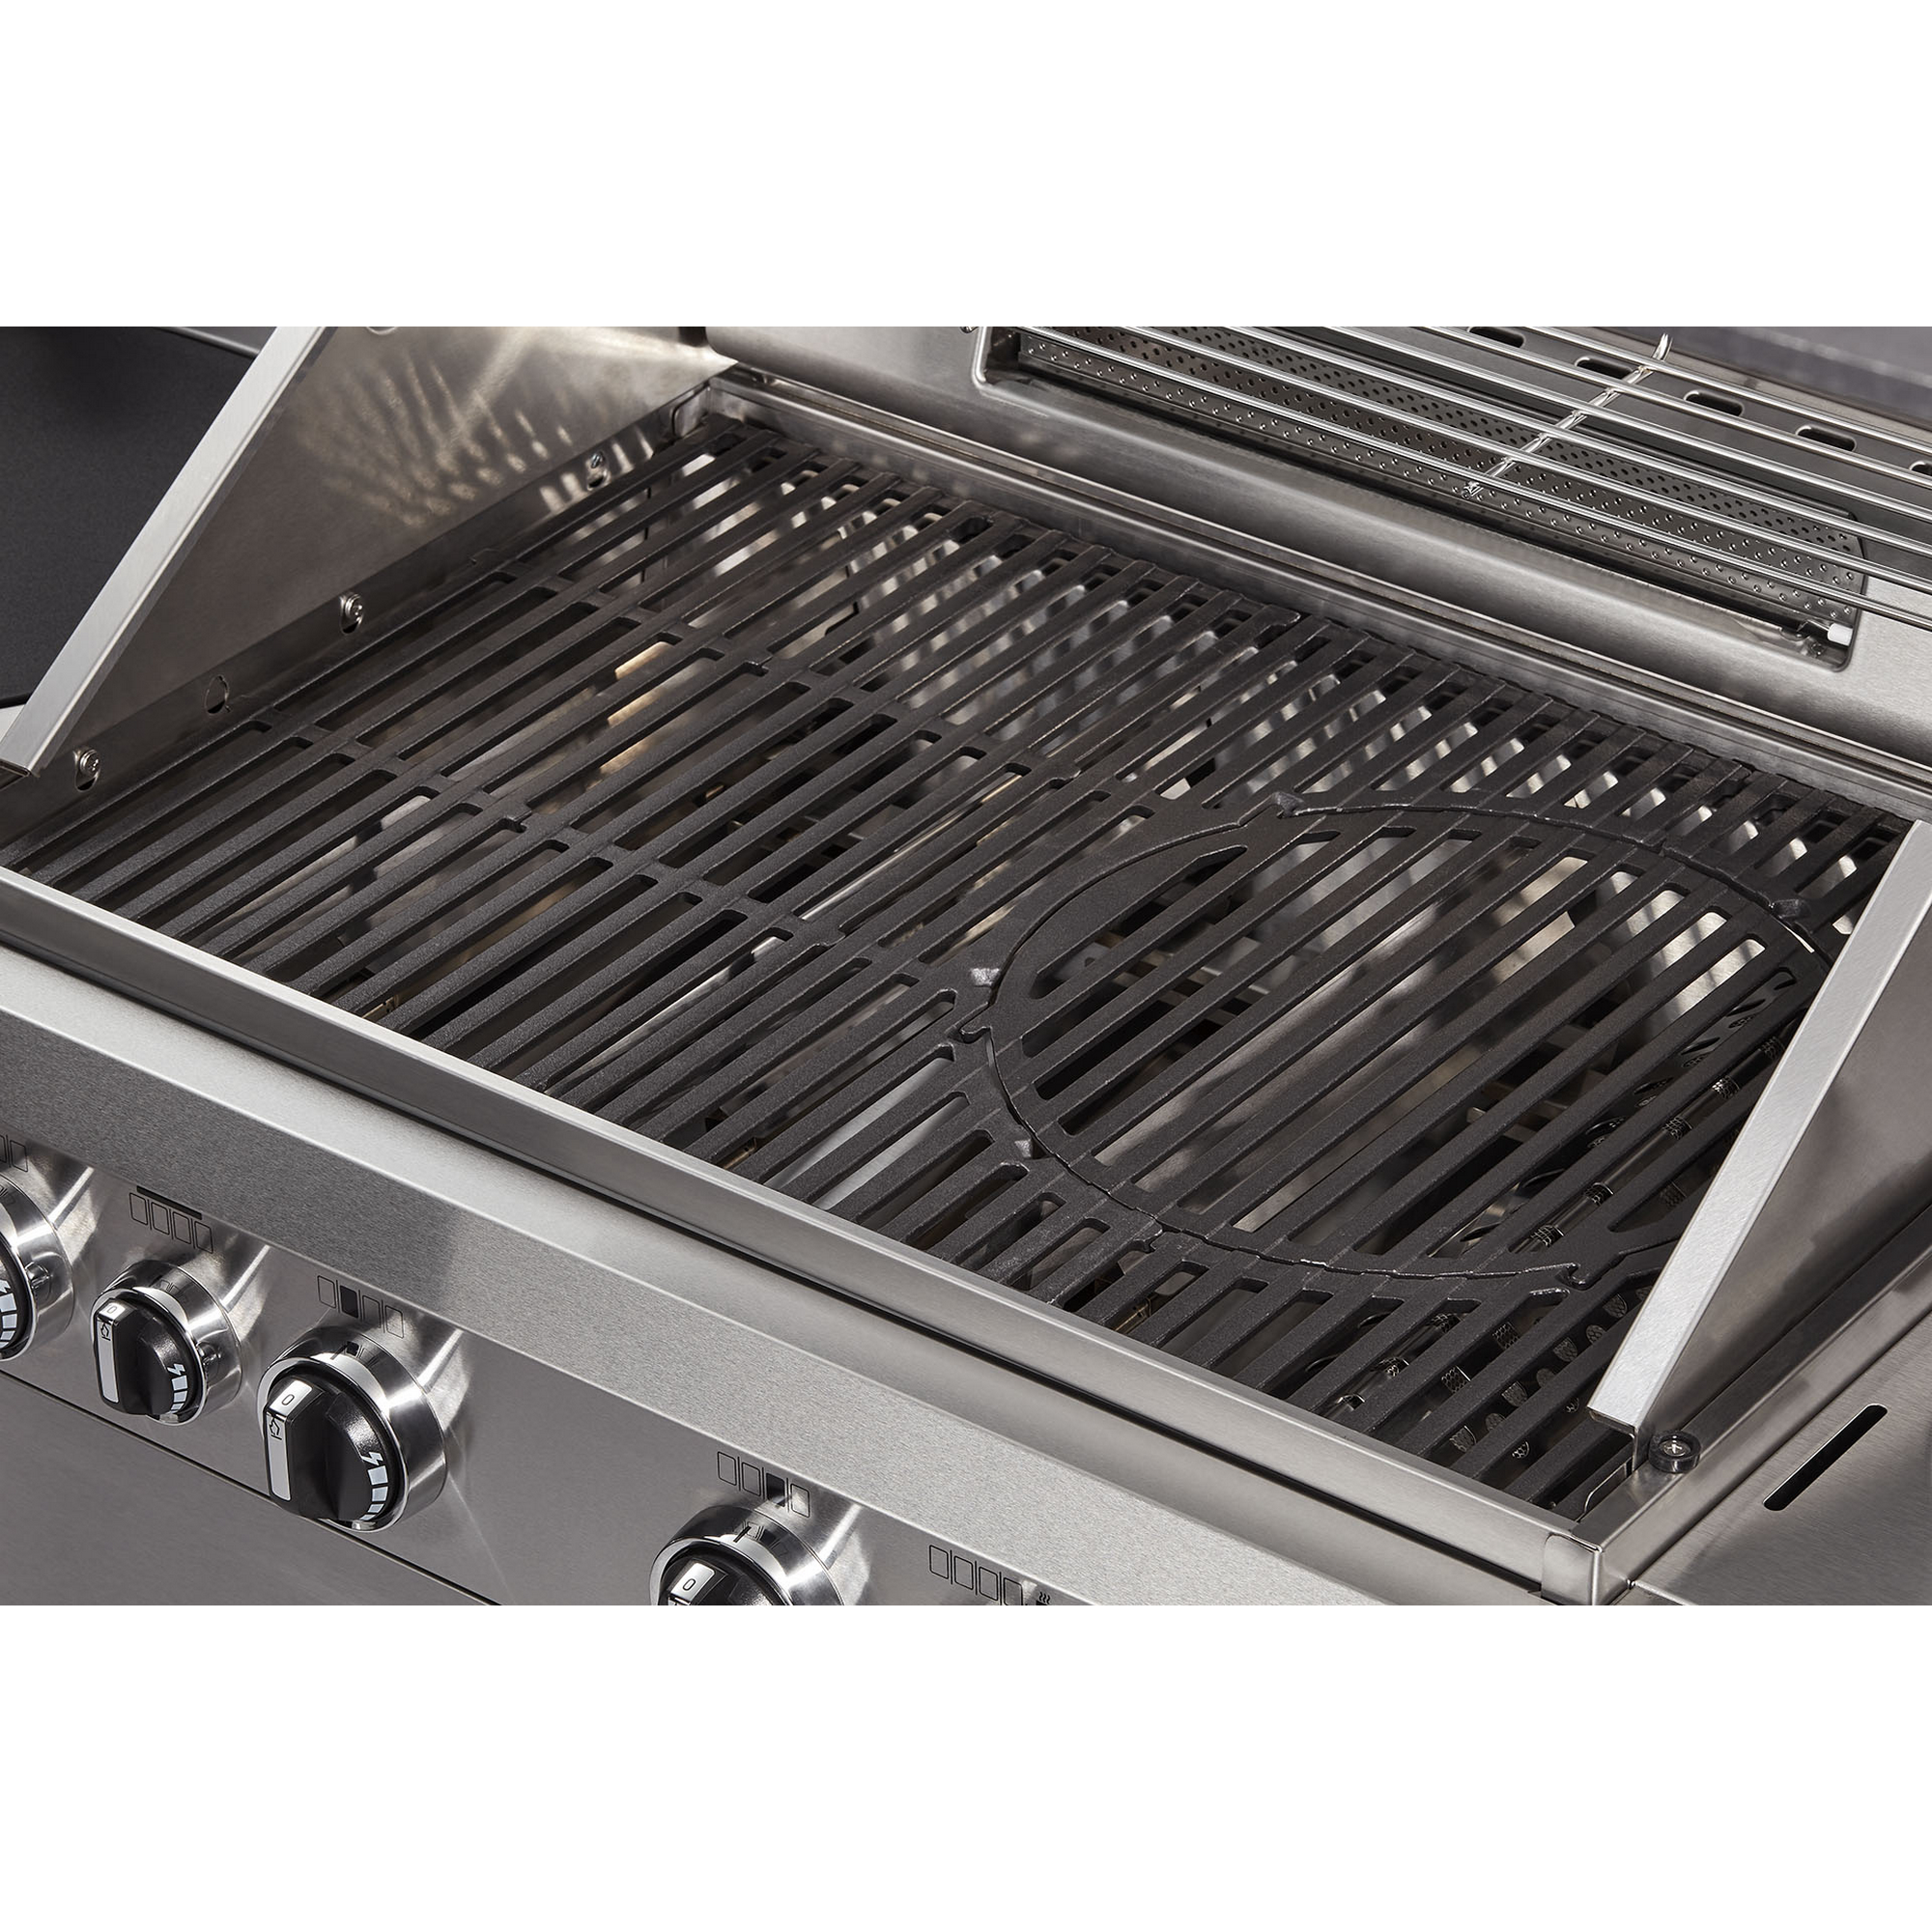 Gasgrill 'Kansas II Pro 4 SIK Turbo' 4 Brenner 153 x 64 x 118 cm + product picture